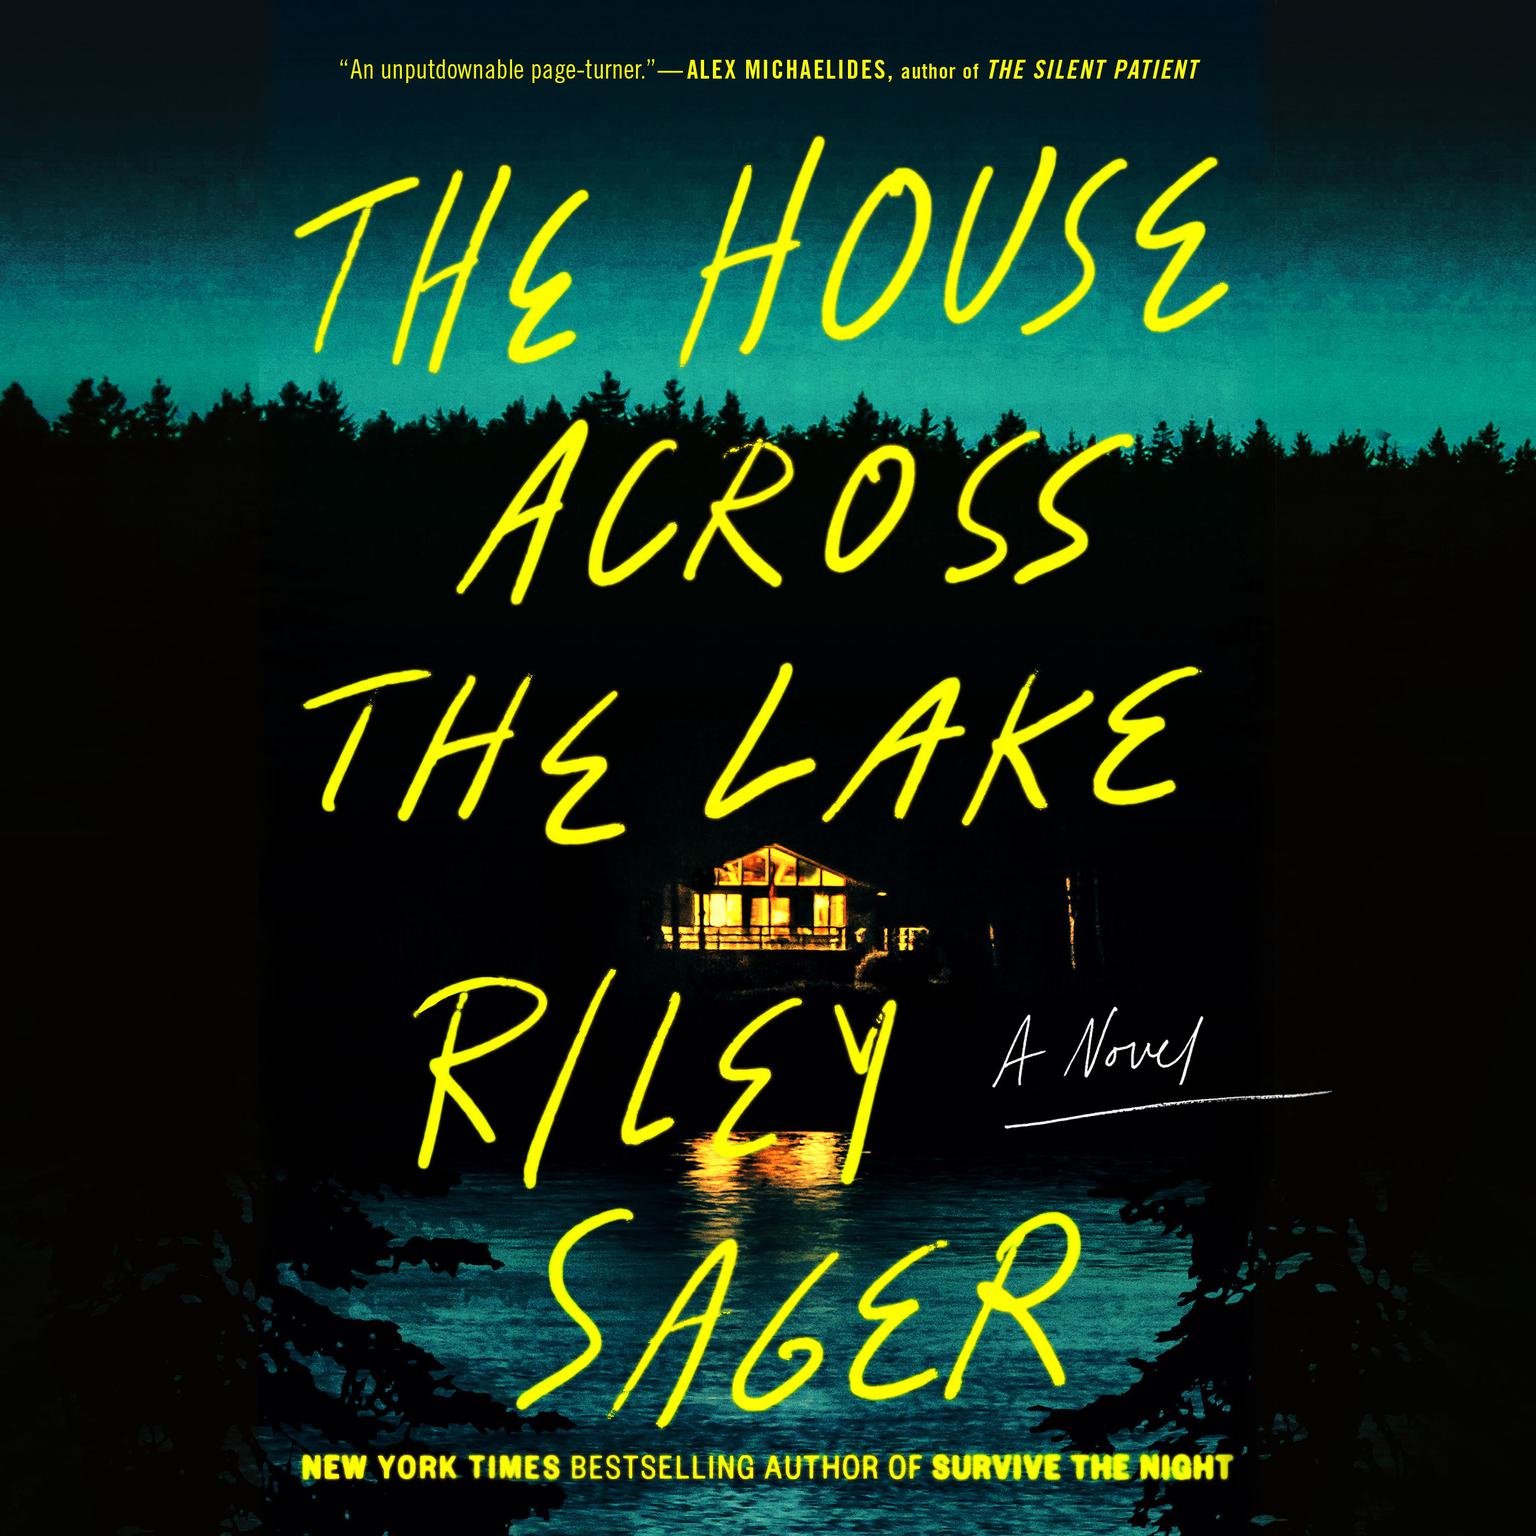 The House Across the Lake: A Novel Audiobook, by Riley Sager